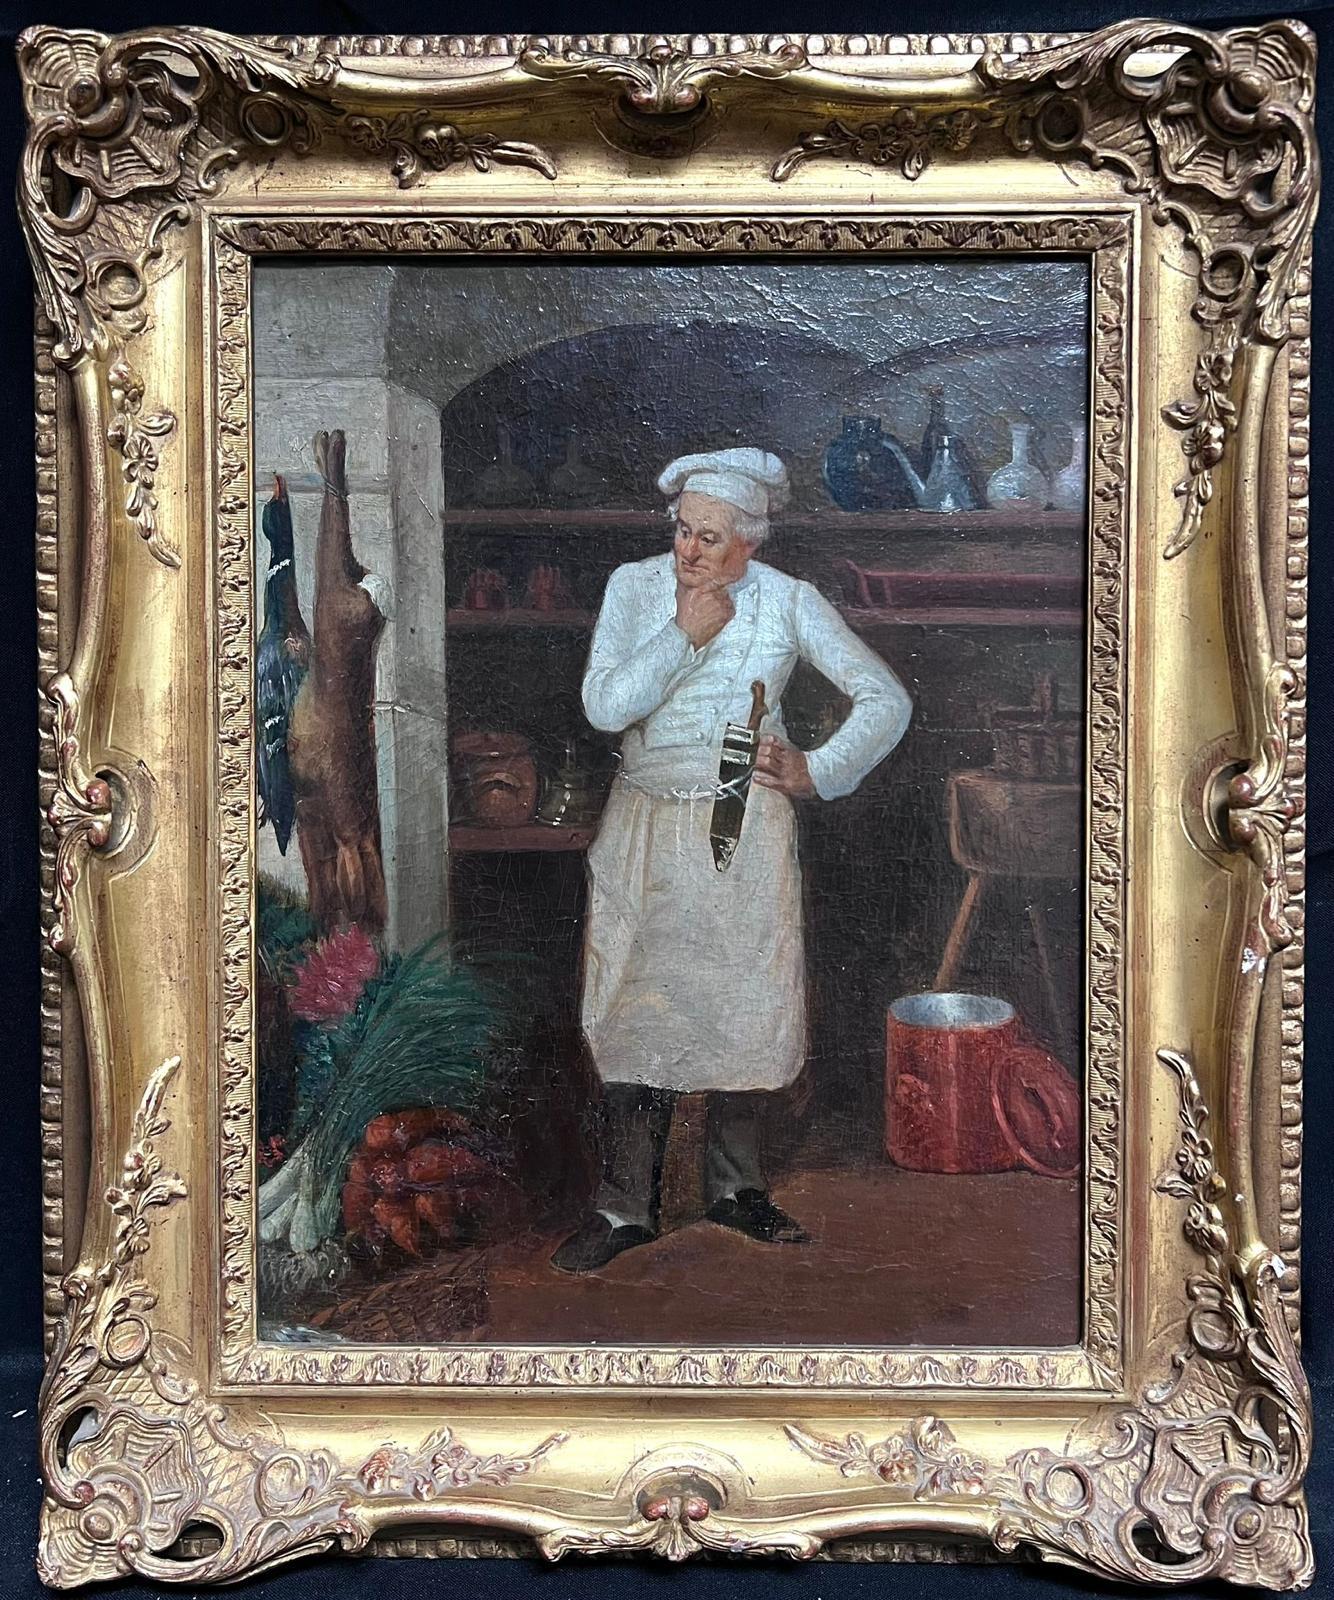 Théodule-Augustin Ribot Figurative Painting - Fine 19th Century French Realist Oil Painting Chef in Kitchen Pantry Larder